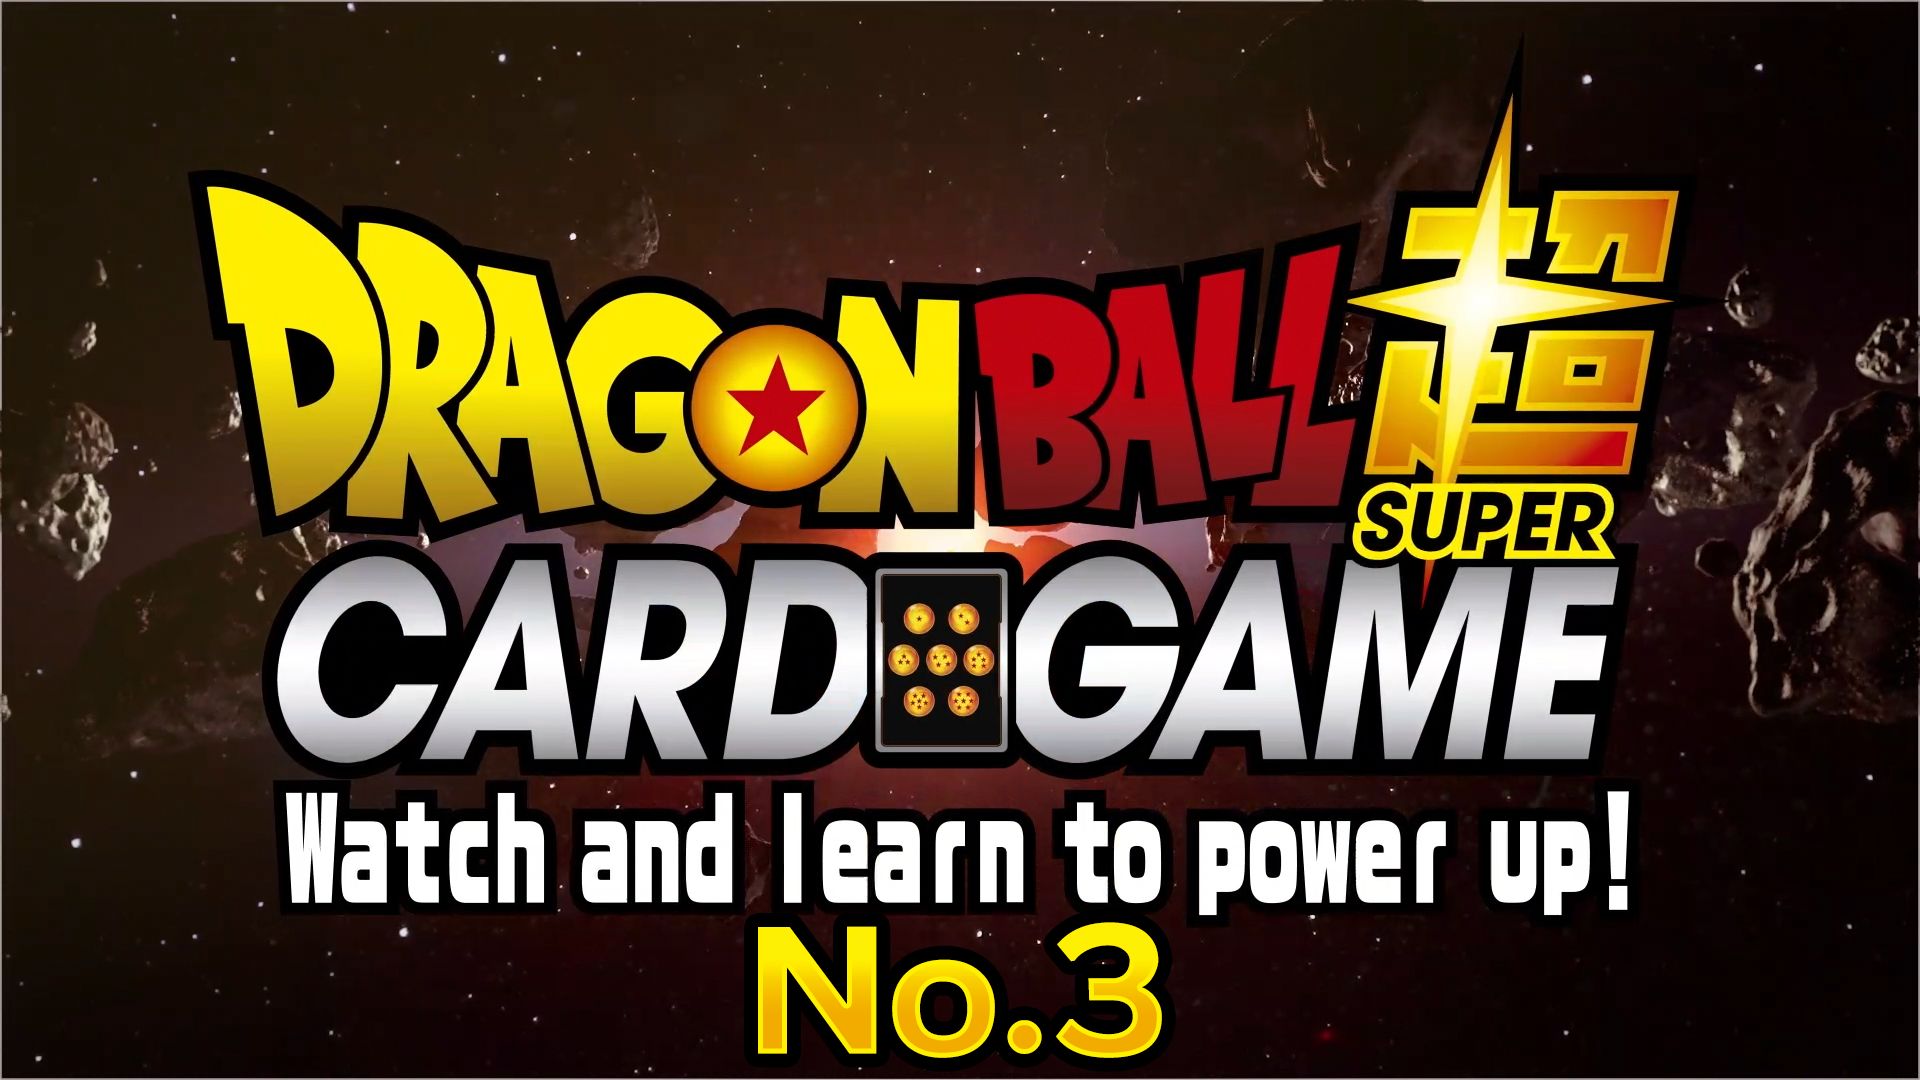 Dragon Ball Super Card Game: Watch and Learn to Power Up! No. 3